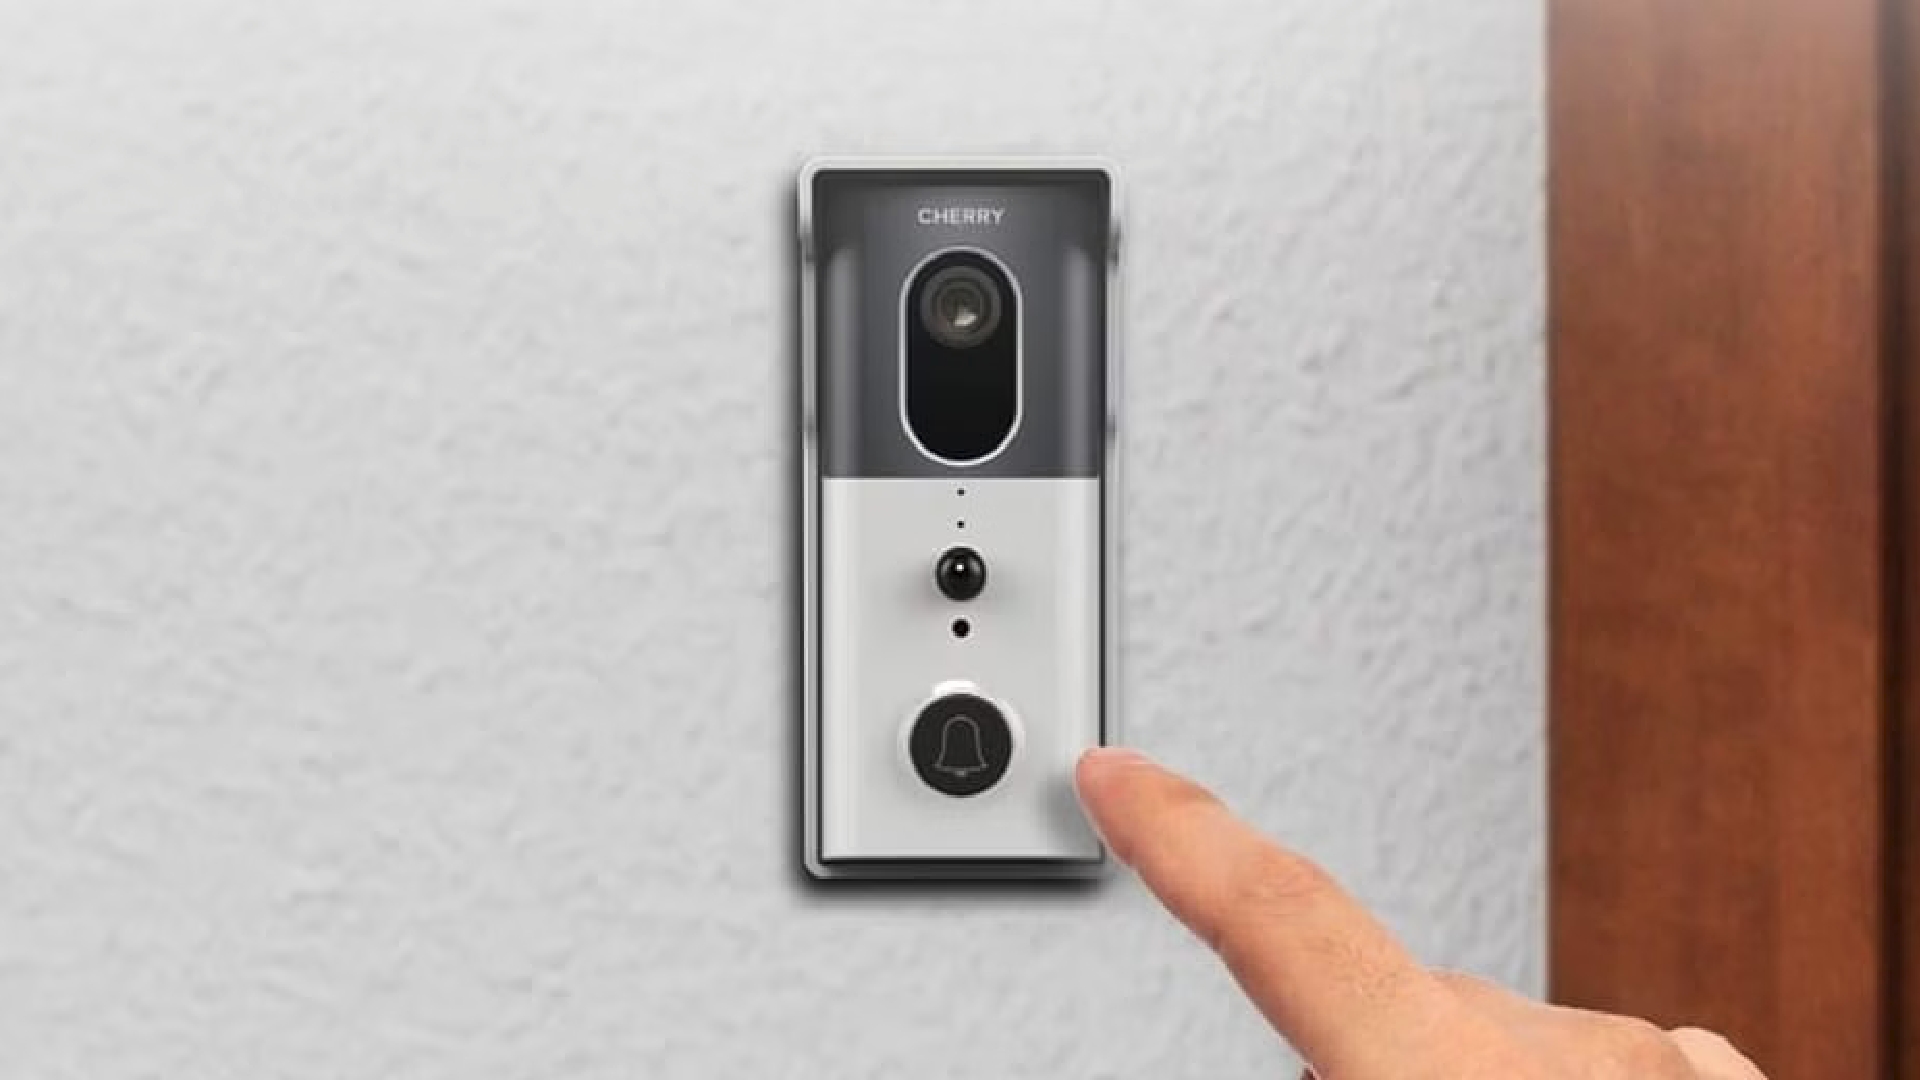 The CHERRY Smart Video Doorbell V2 is now accessible.